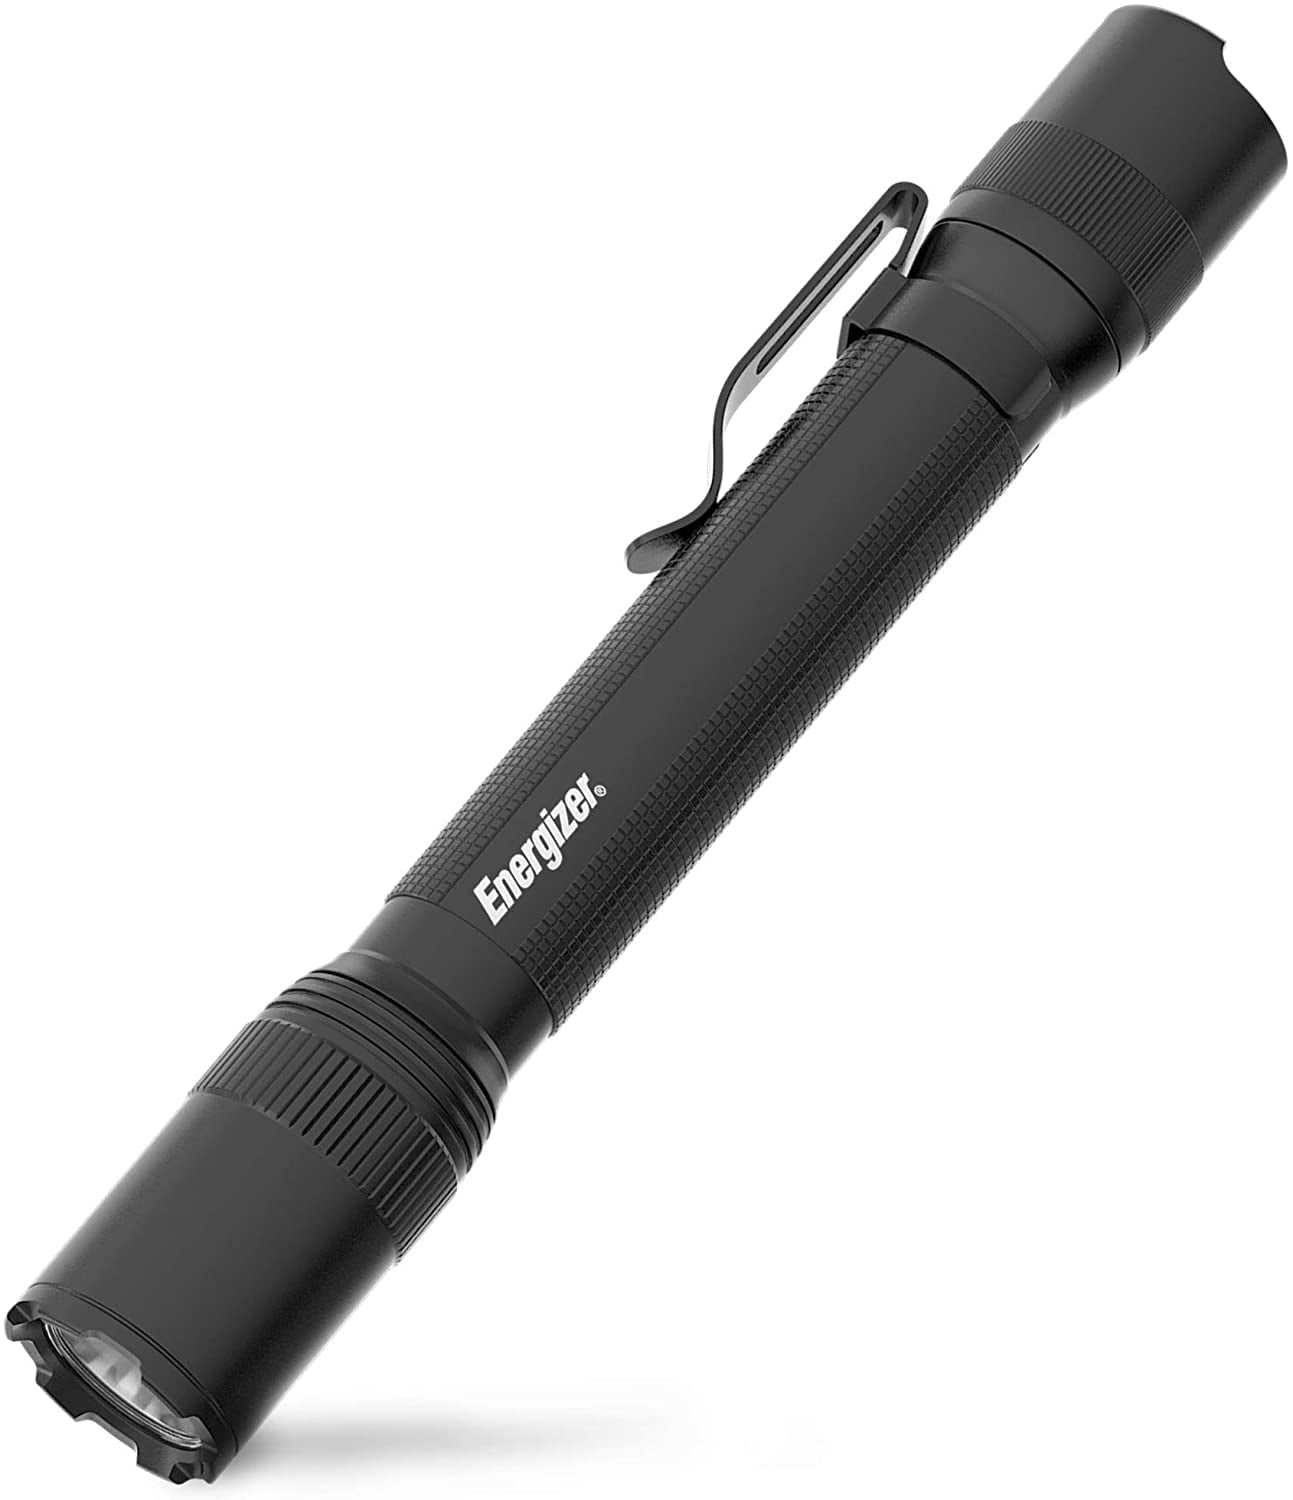 Energizer LED AA Flashlight and Lantern Compact & Water-Resistant 2-in-1 Light 